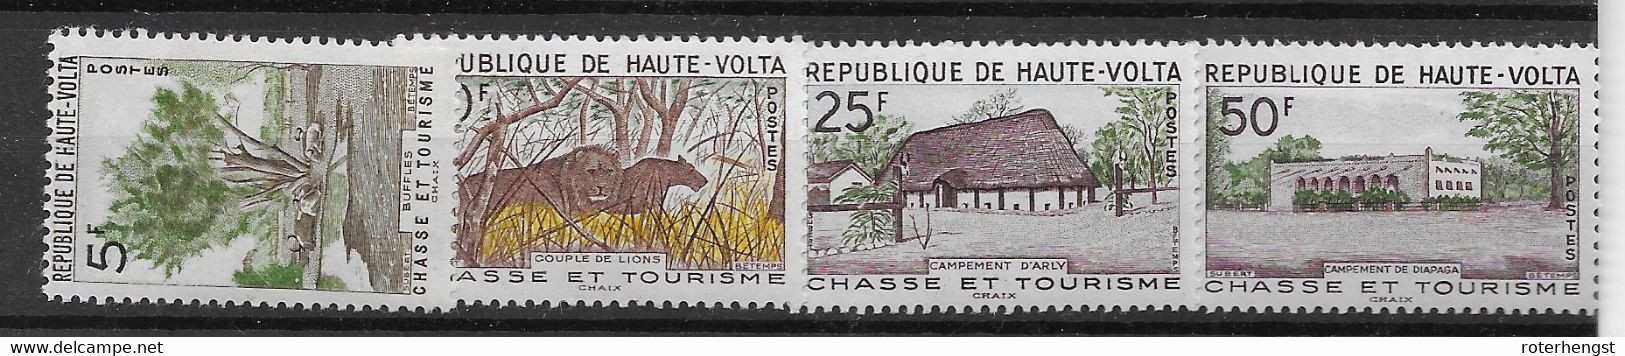 Upper Volta Lot Of Good Stamps/airmails Mnh ** 60ths About 45 Euros Animals Space Topics (2 Scans) - Haute-Volta (1958-1984)